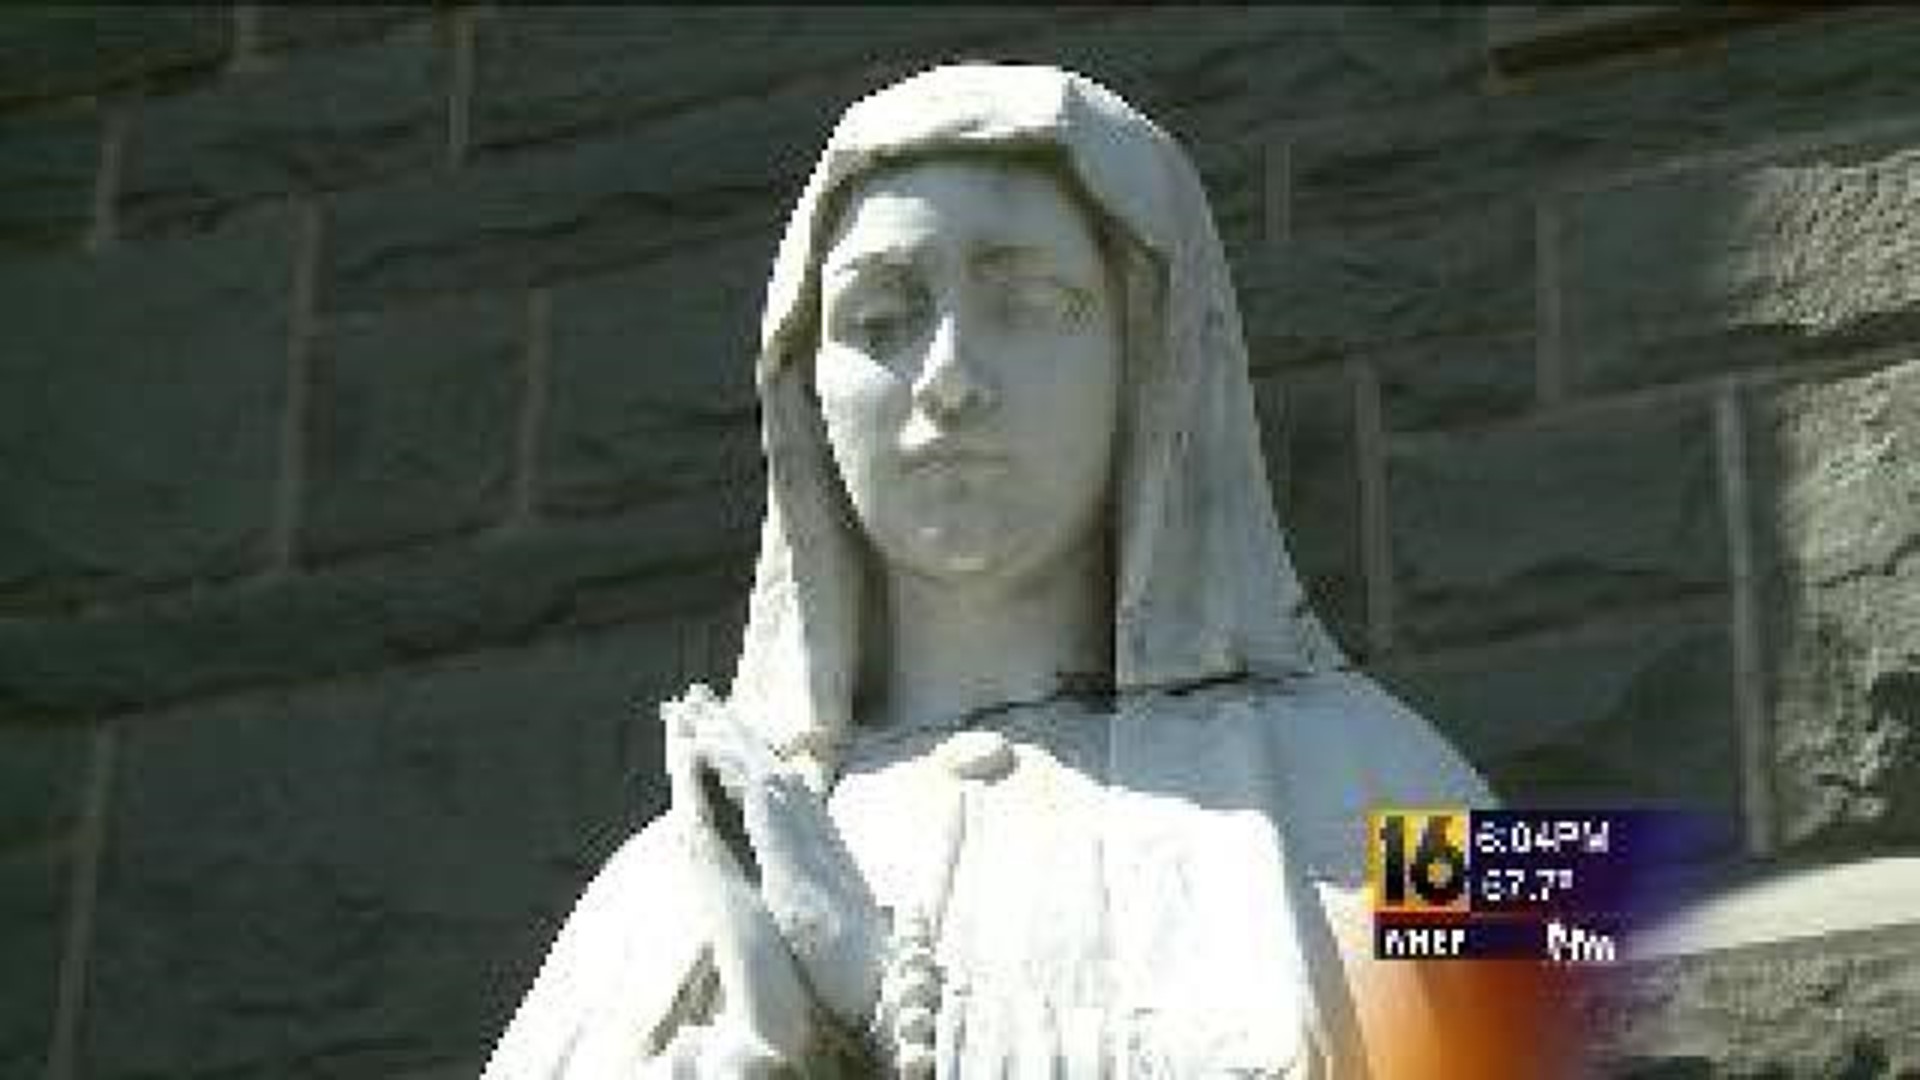 Offer to Fix Vandalized Statue for Free